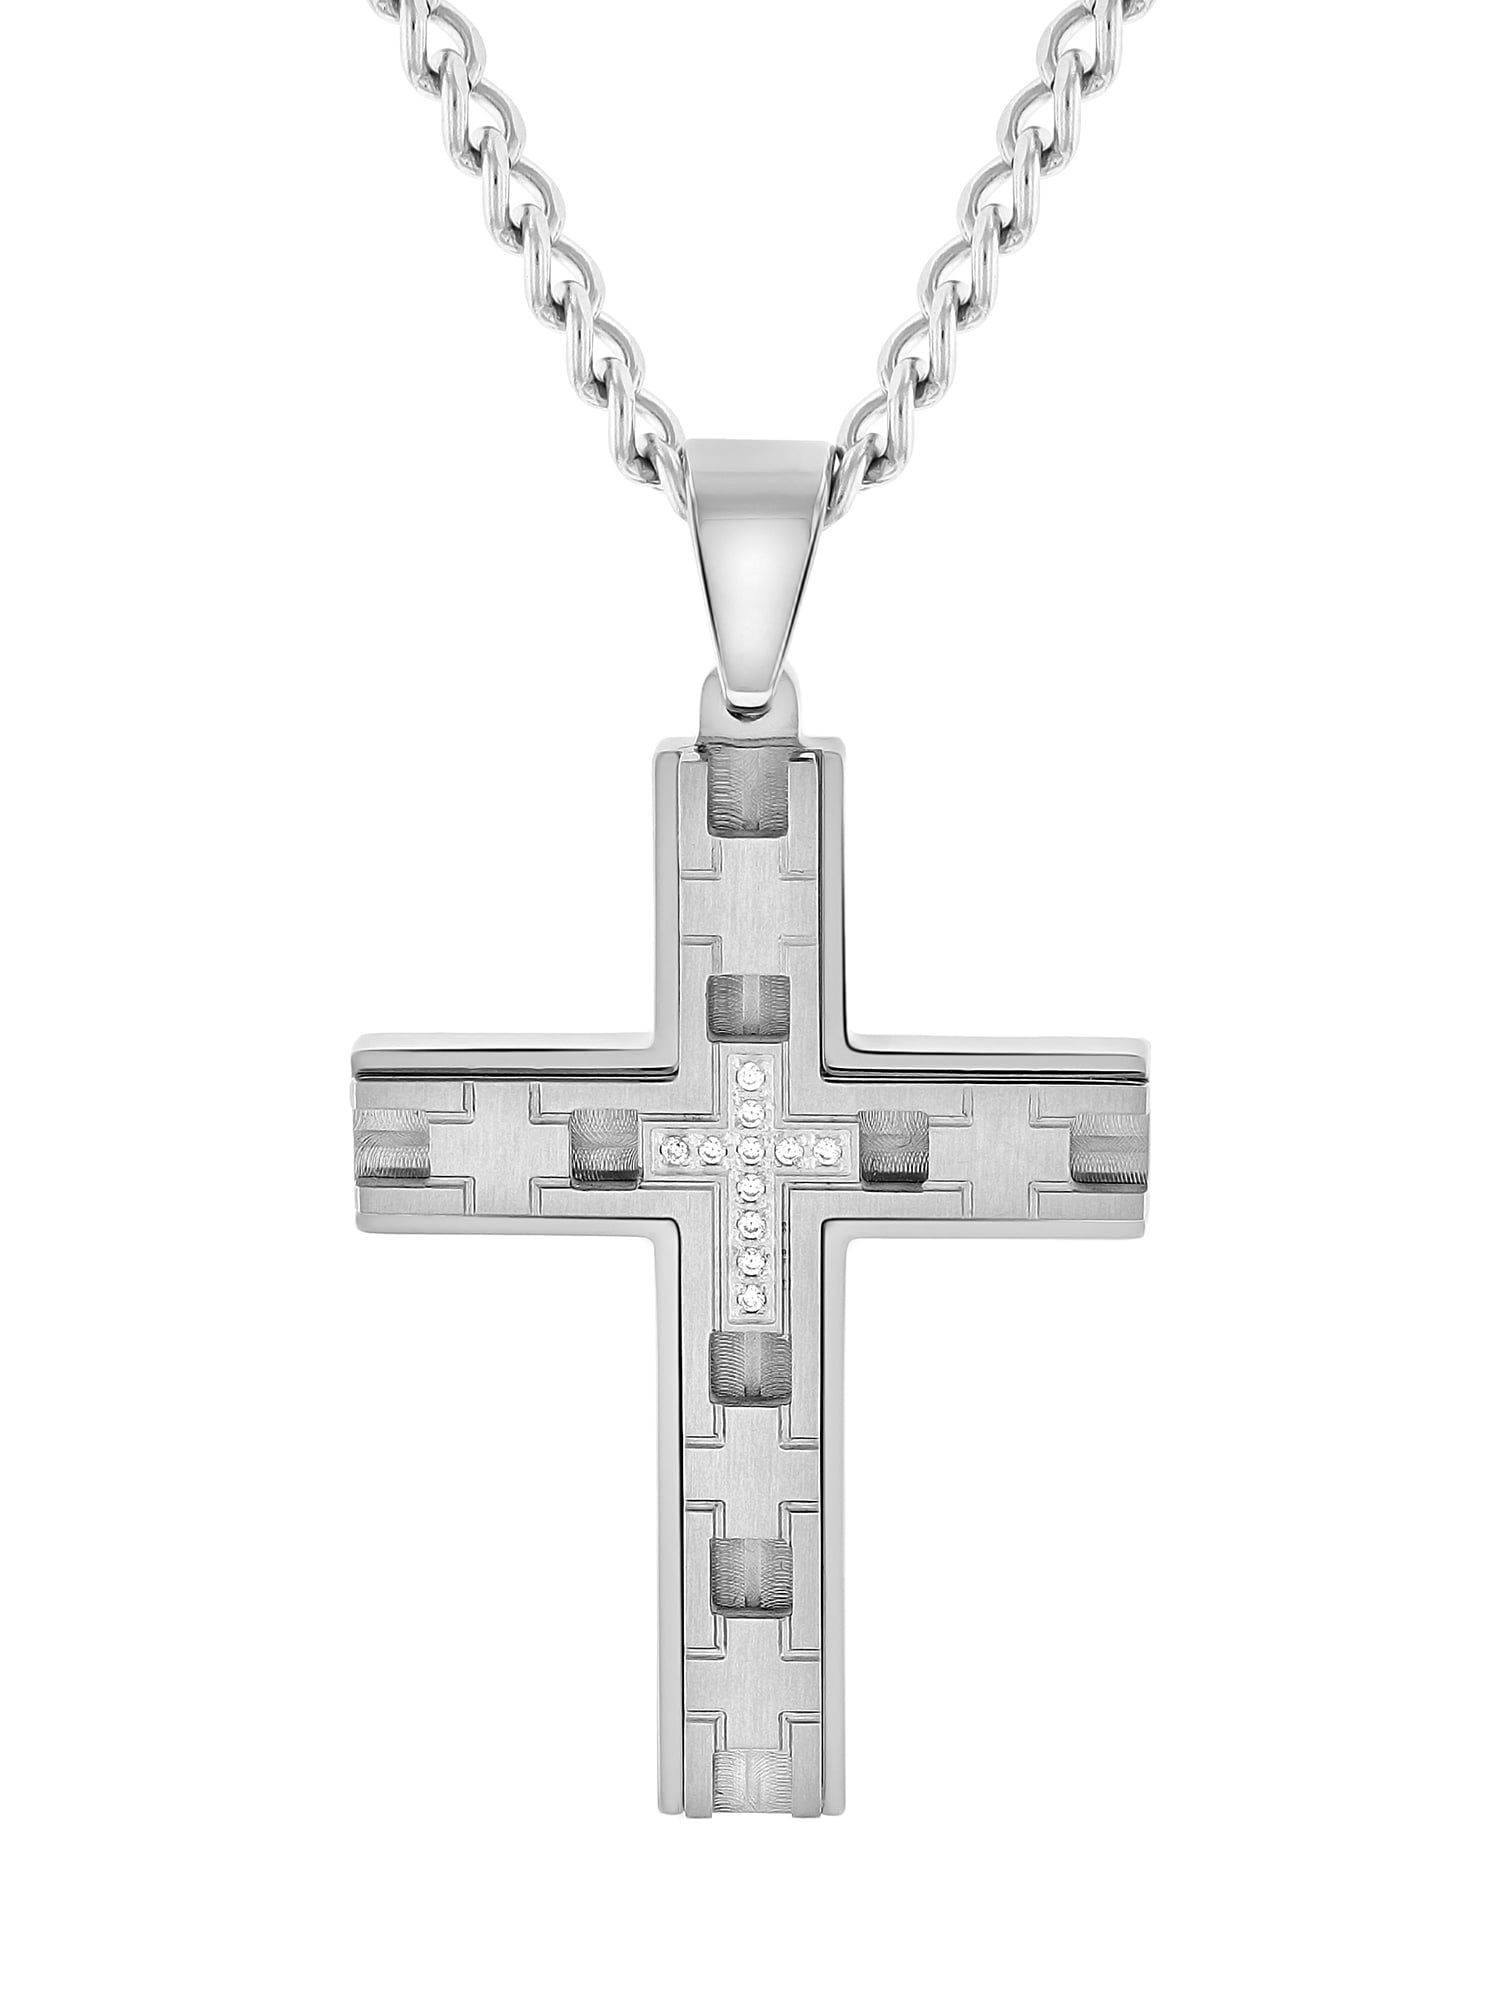 Believe by Brilliance Mens Stainless Steel Cubic Zirconia Cross Pendant Necklace Chain